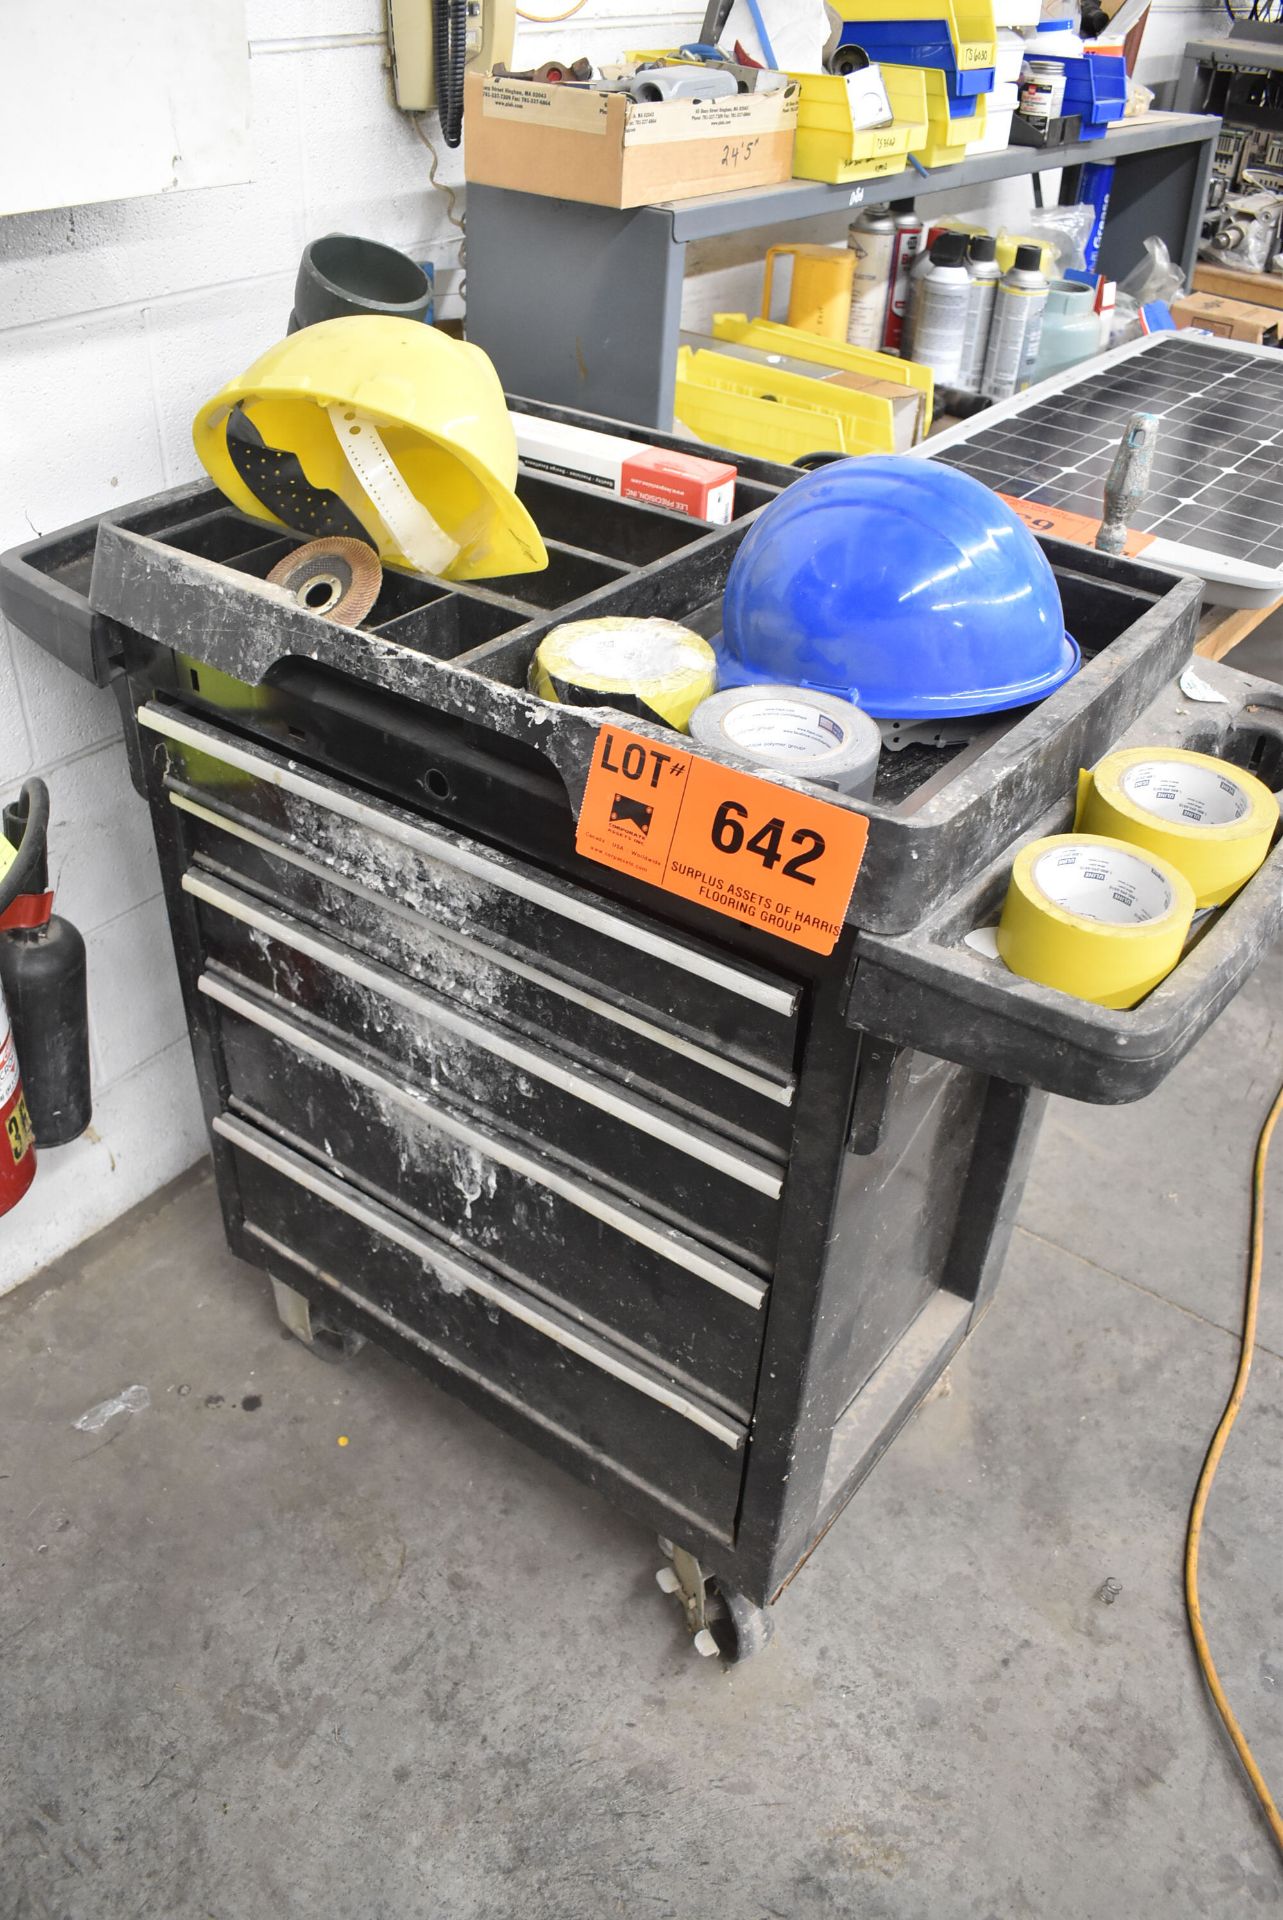 LOT/ 5-DRAWER ROLLING TOOL BOX WITH CONTENTS